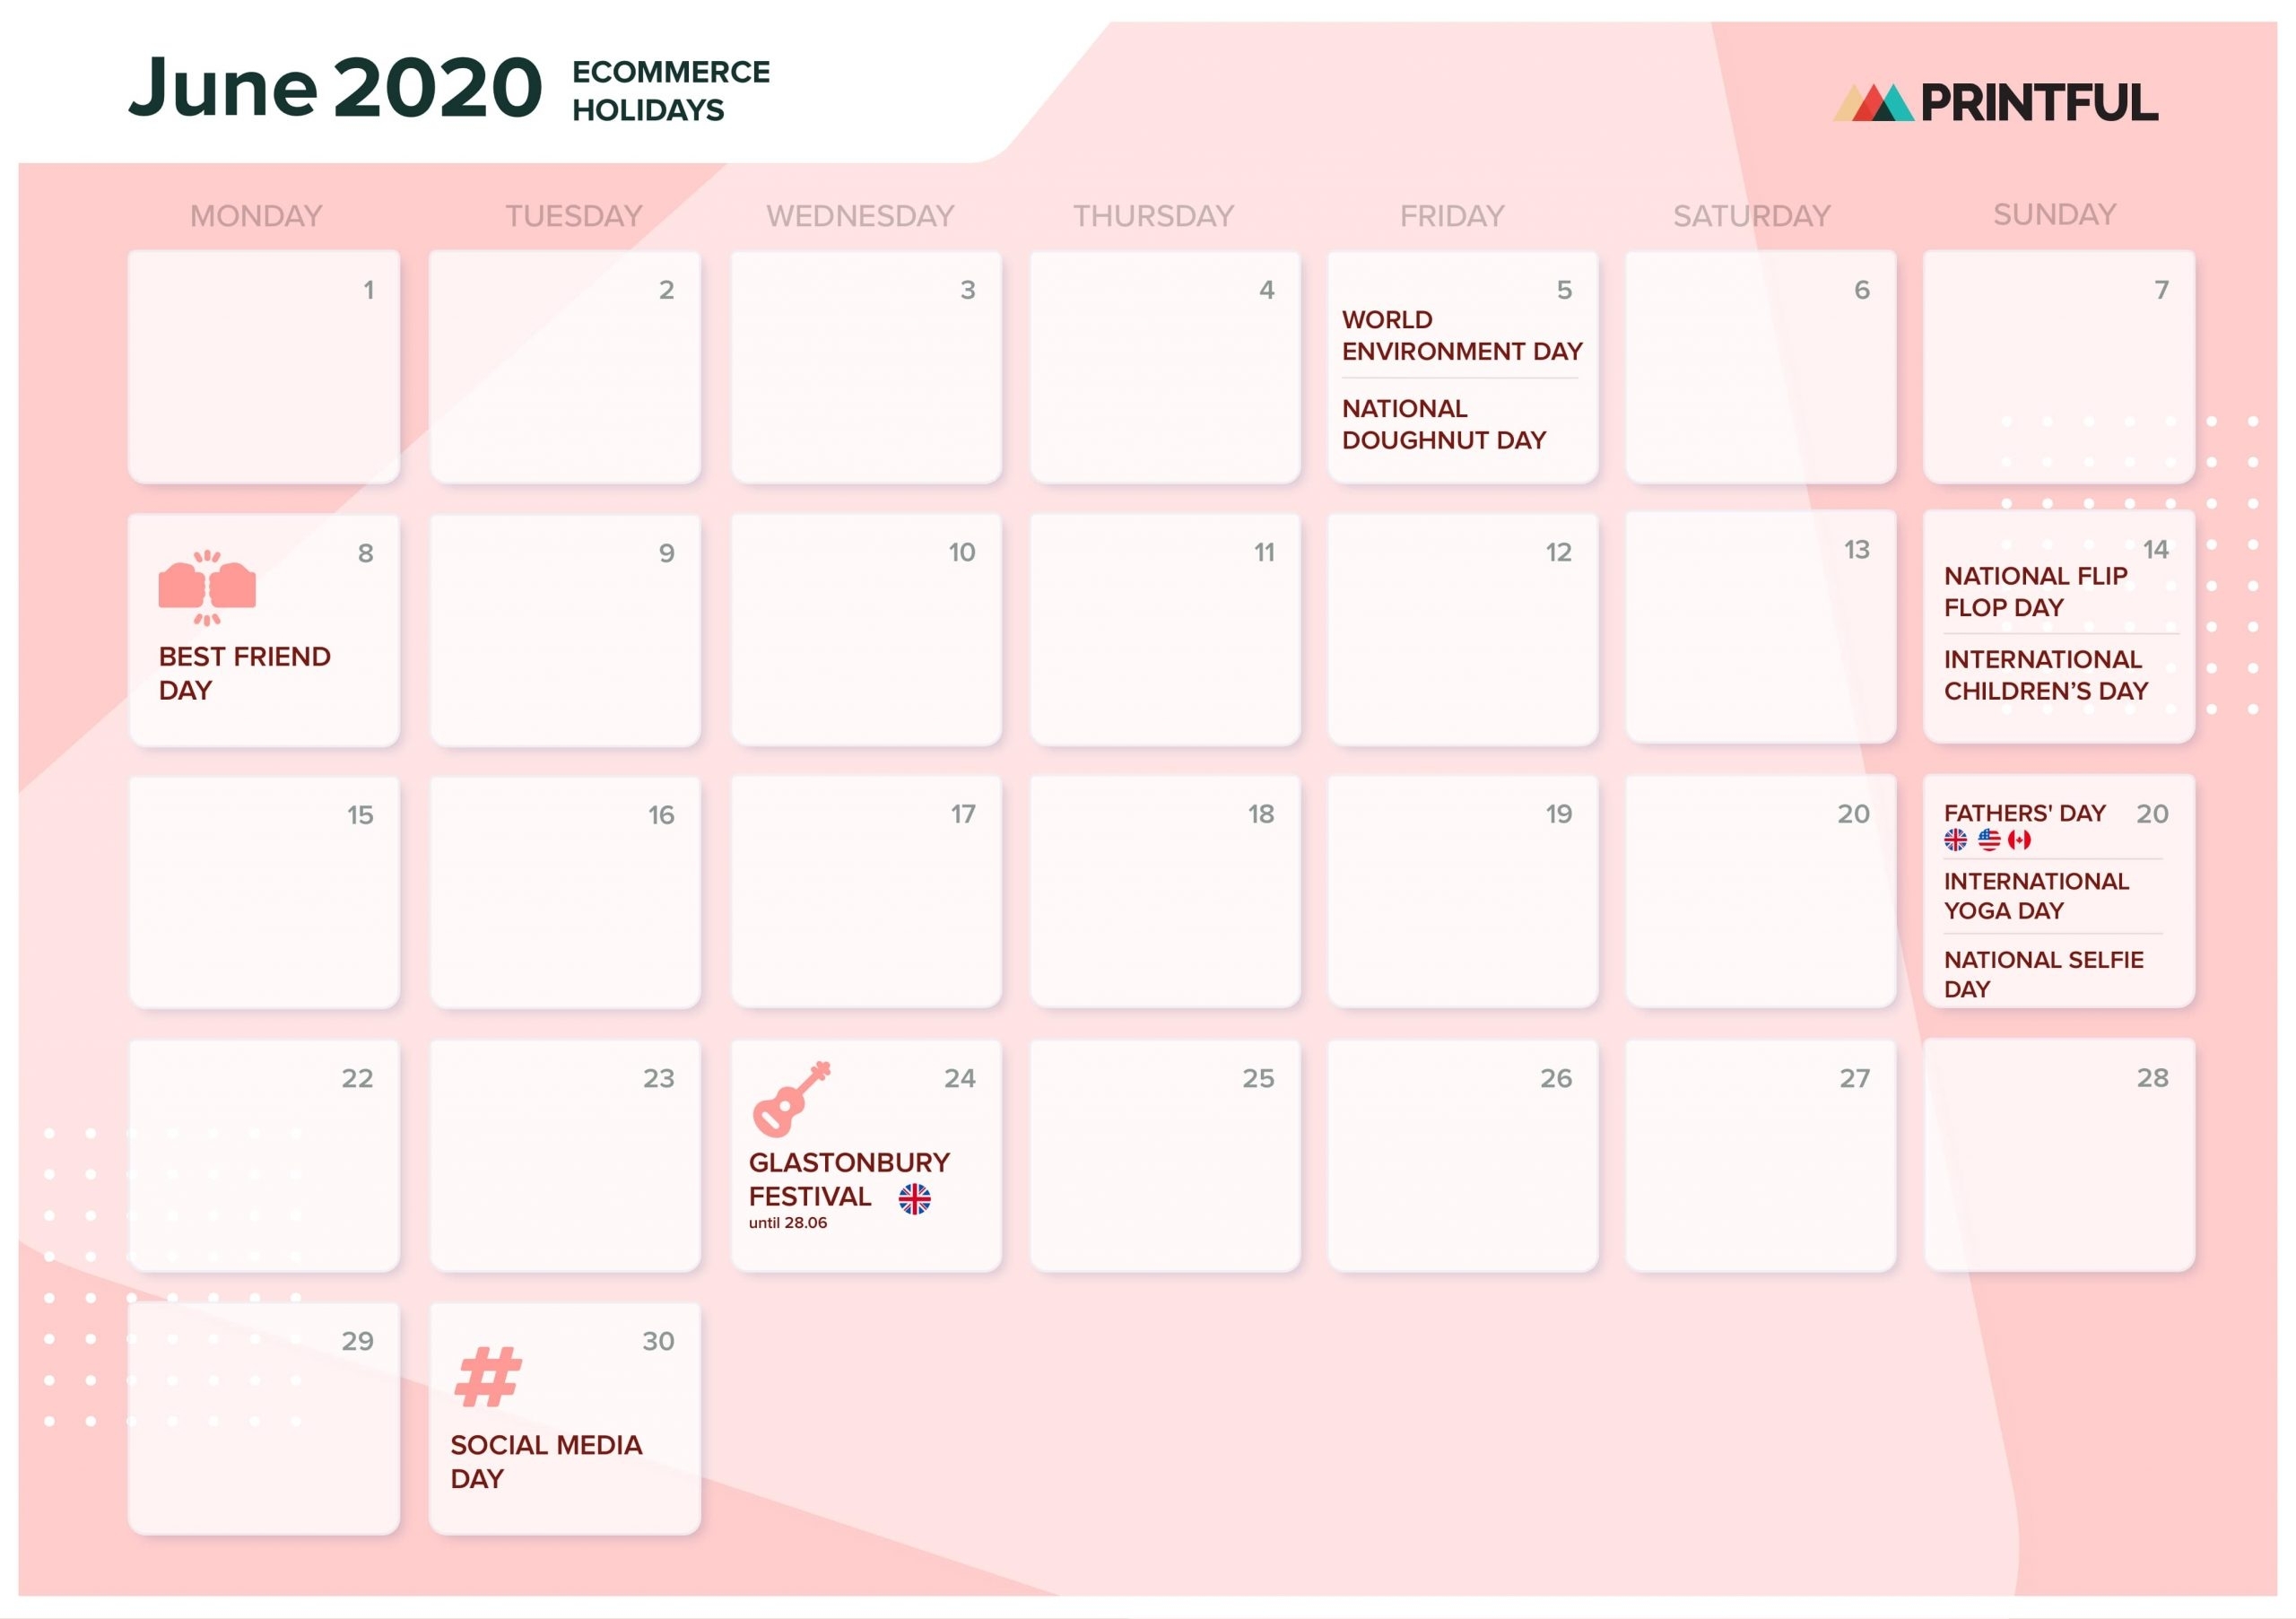 The Ultimate 2020 Ecommerce Holiday Marketing Calendar within Please Find A Calendar On Line For Special Days Of The Year 2020